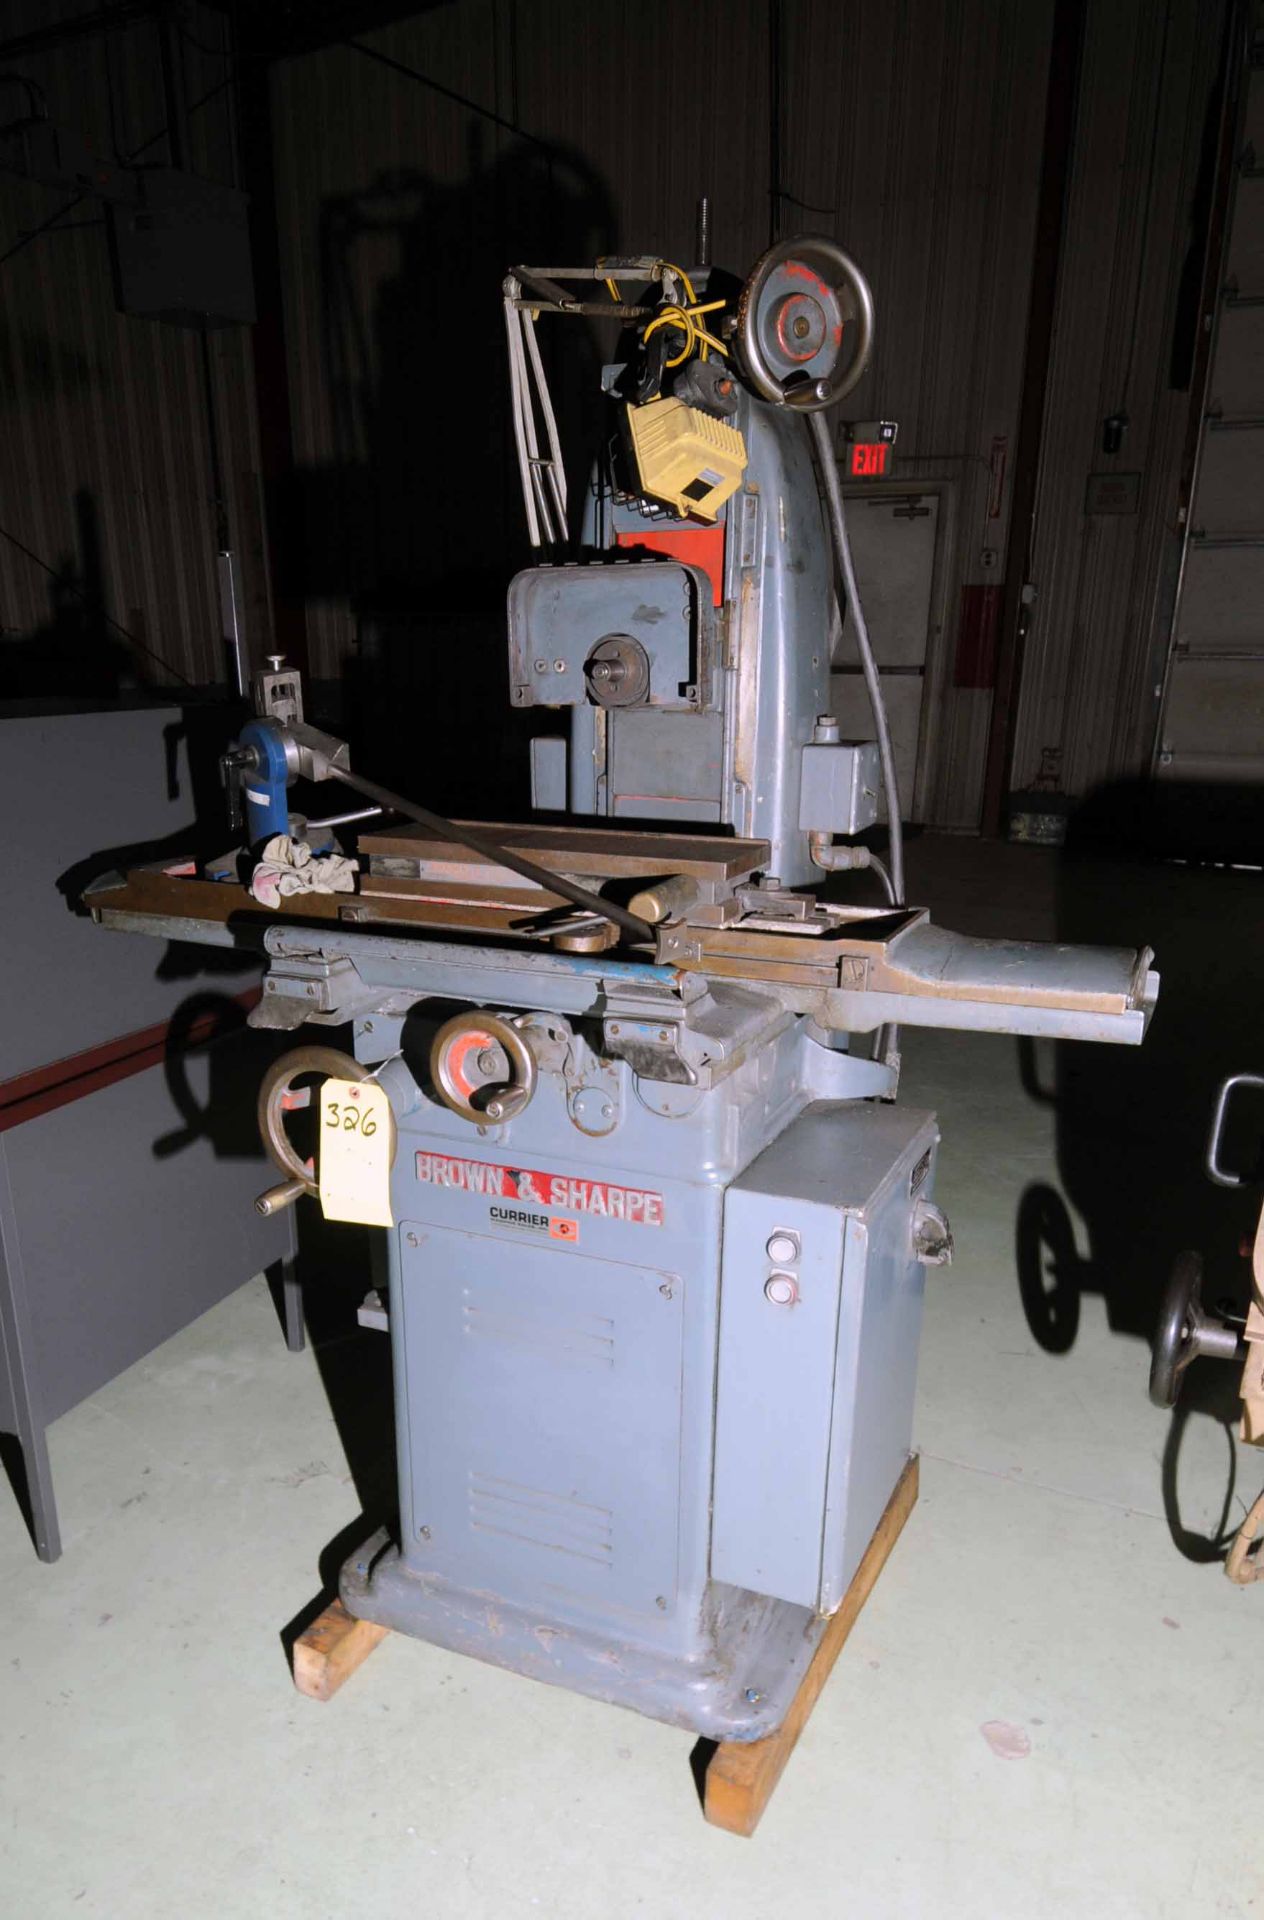 HAND FEED SURFACE GRINDER, BROWN & SHARPE 6” X 18” MDL. 2L, perm. magnetic chuck, S/N 523-2-1668 (